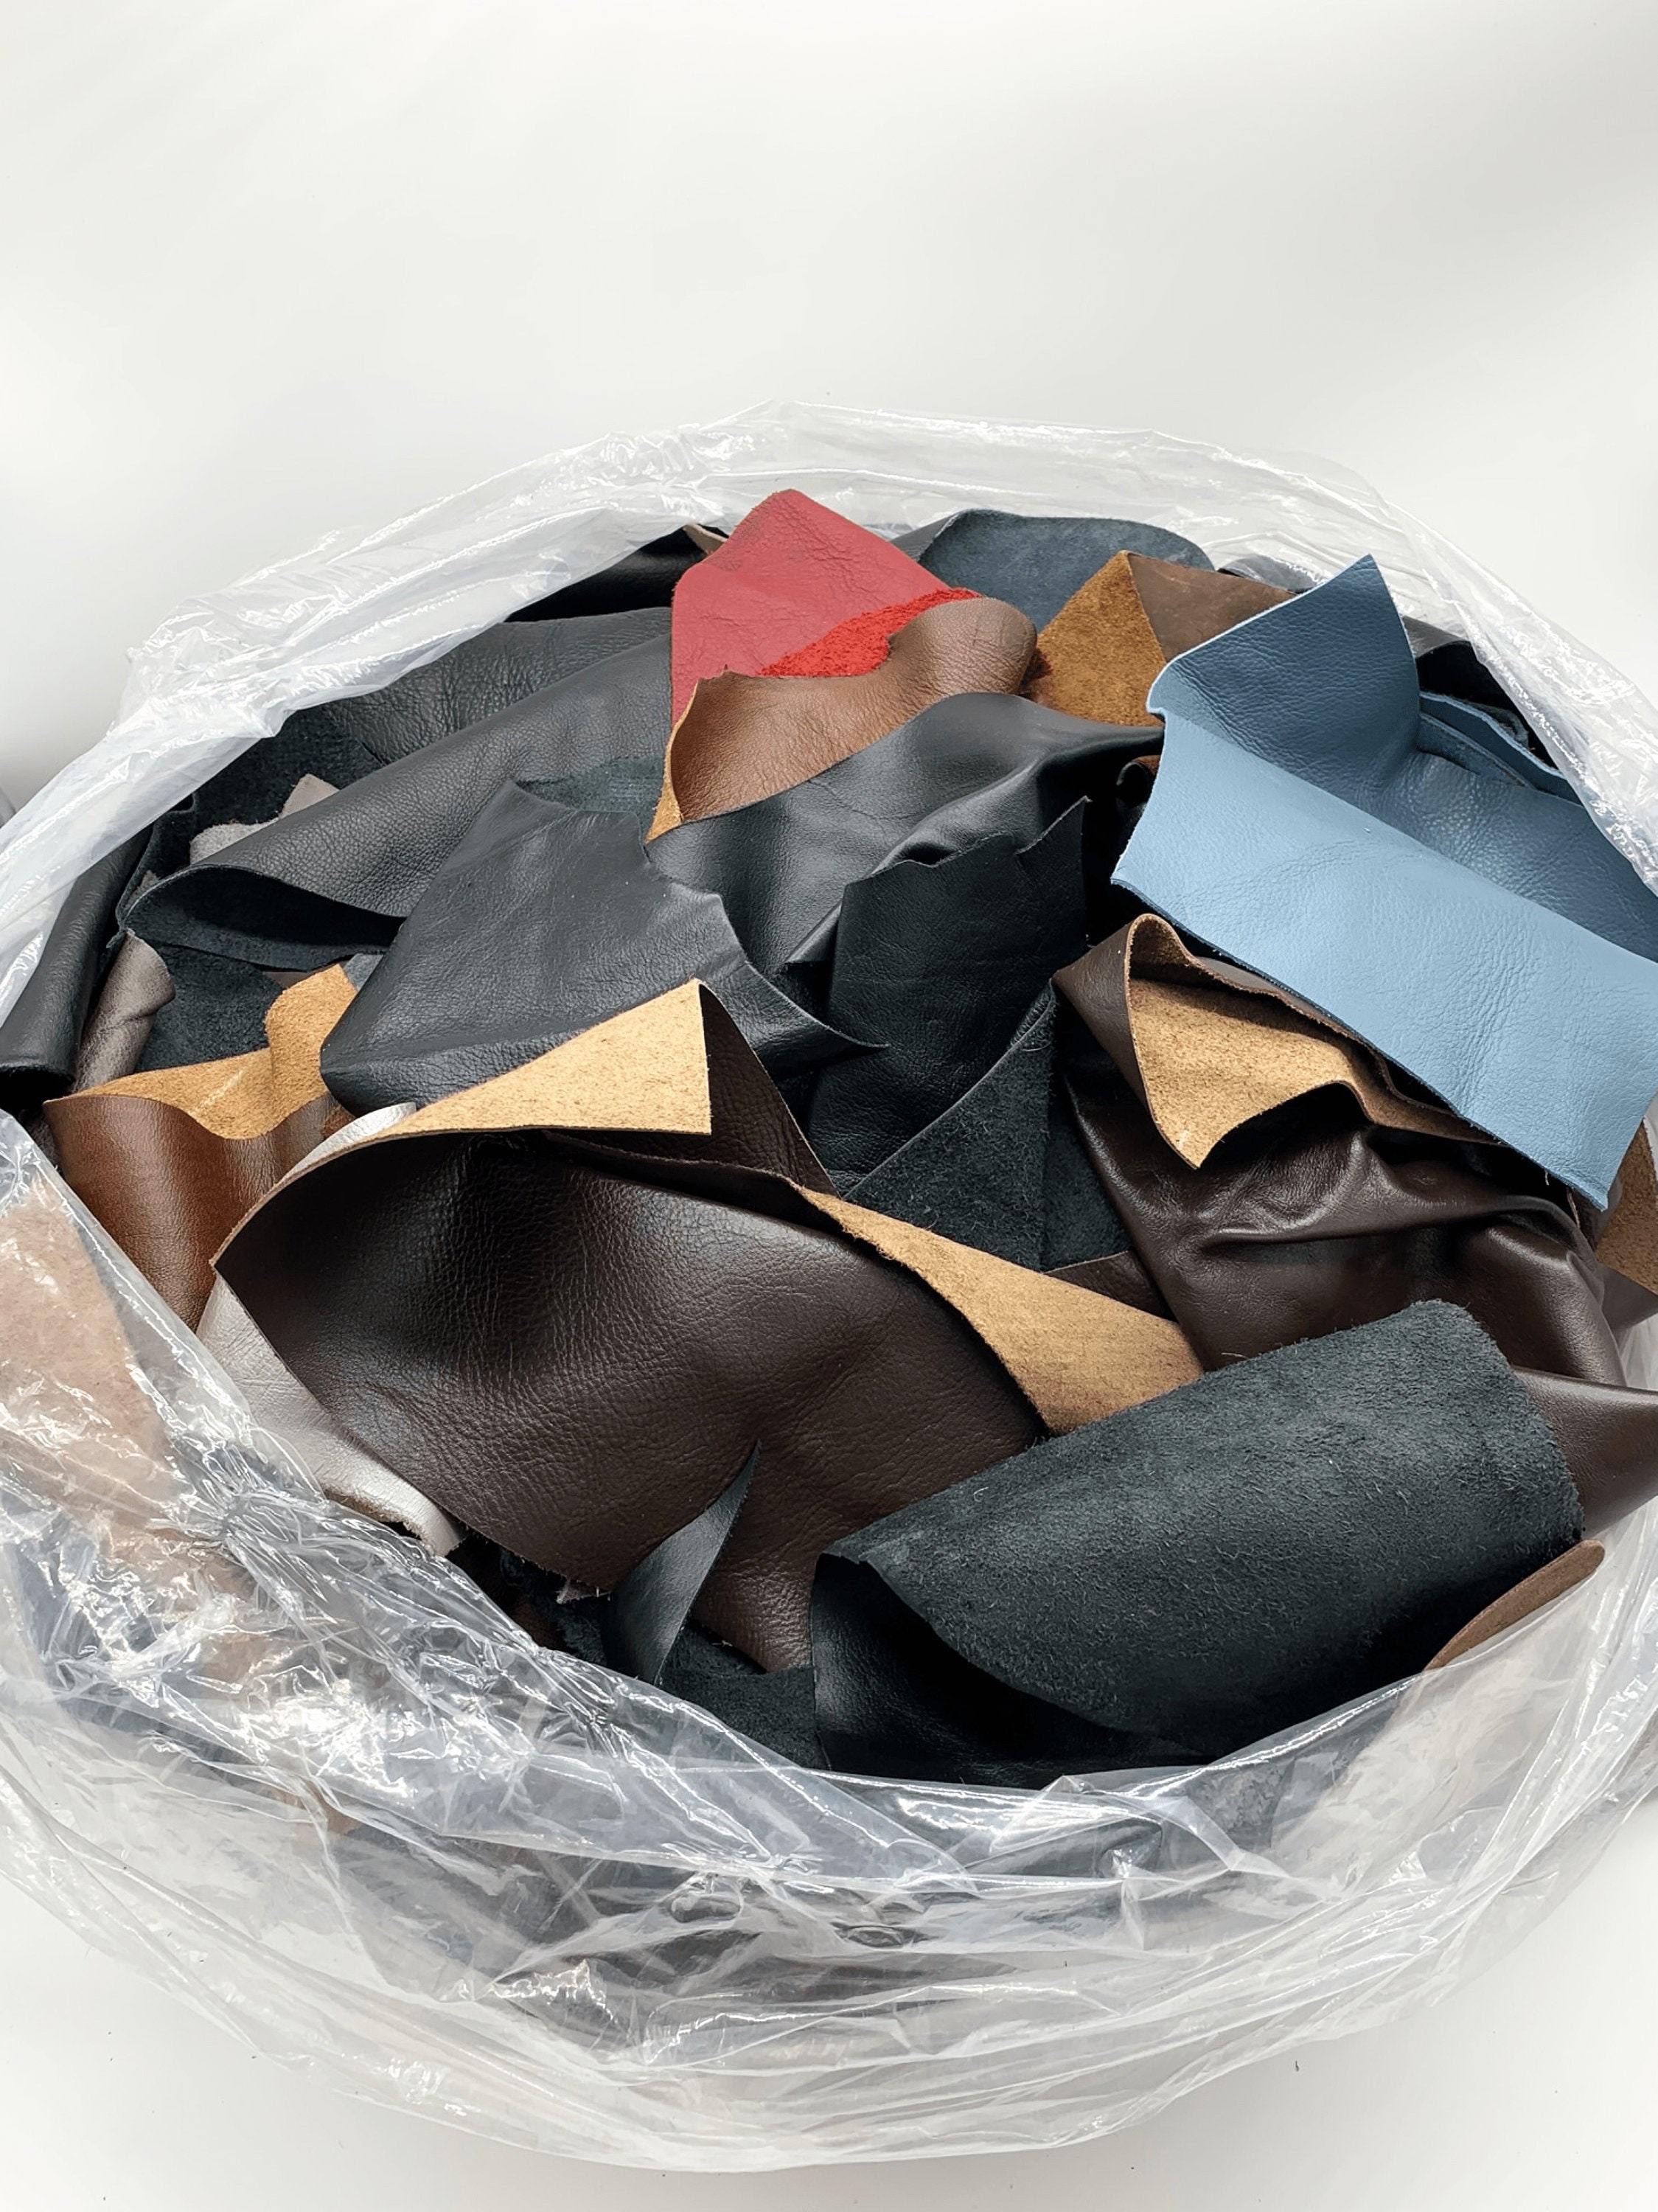 Leather Scraps 1 LB – Upon Leather